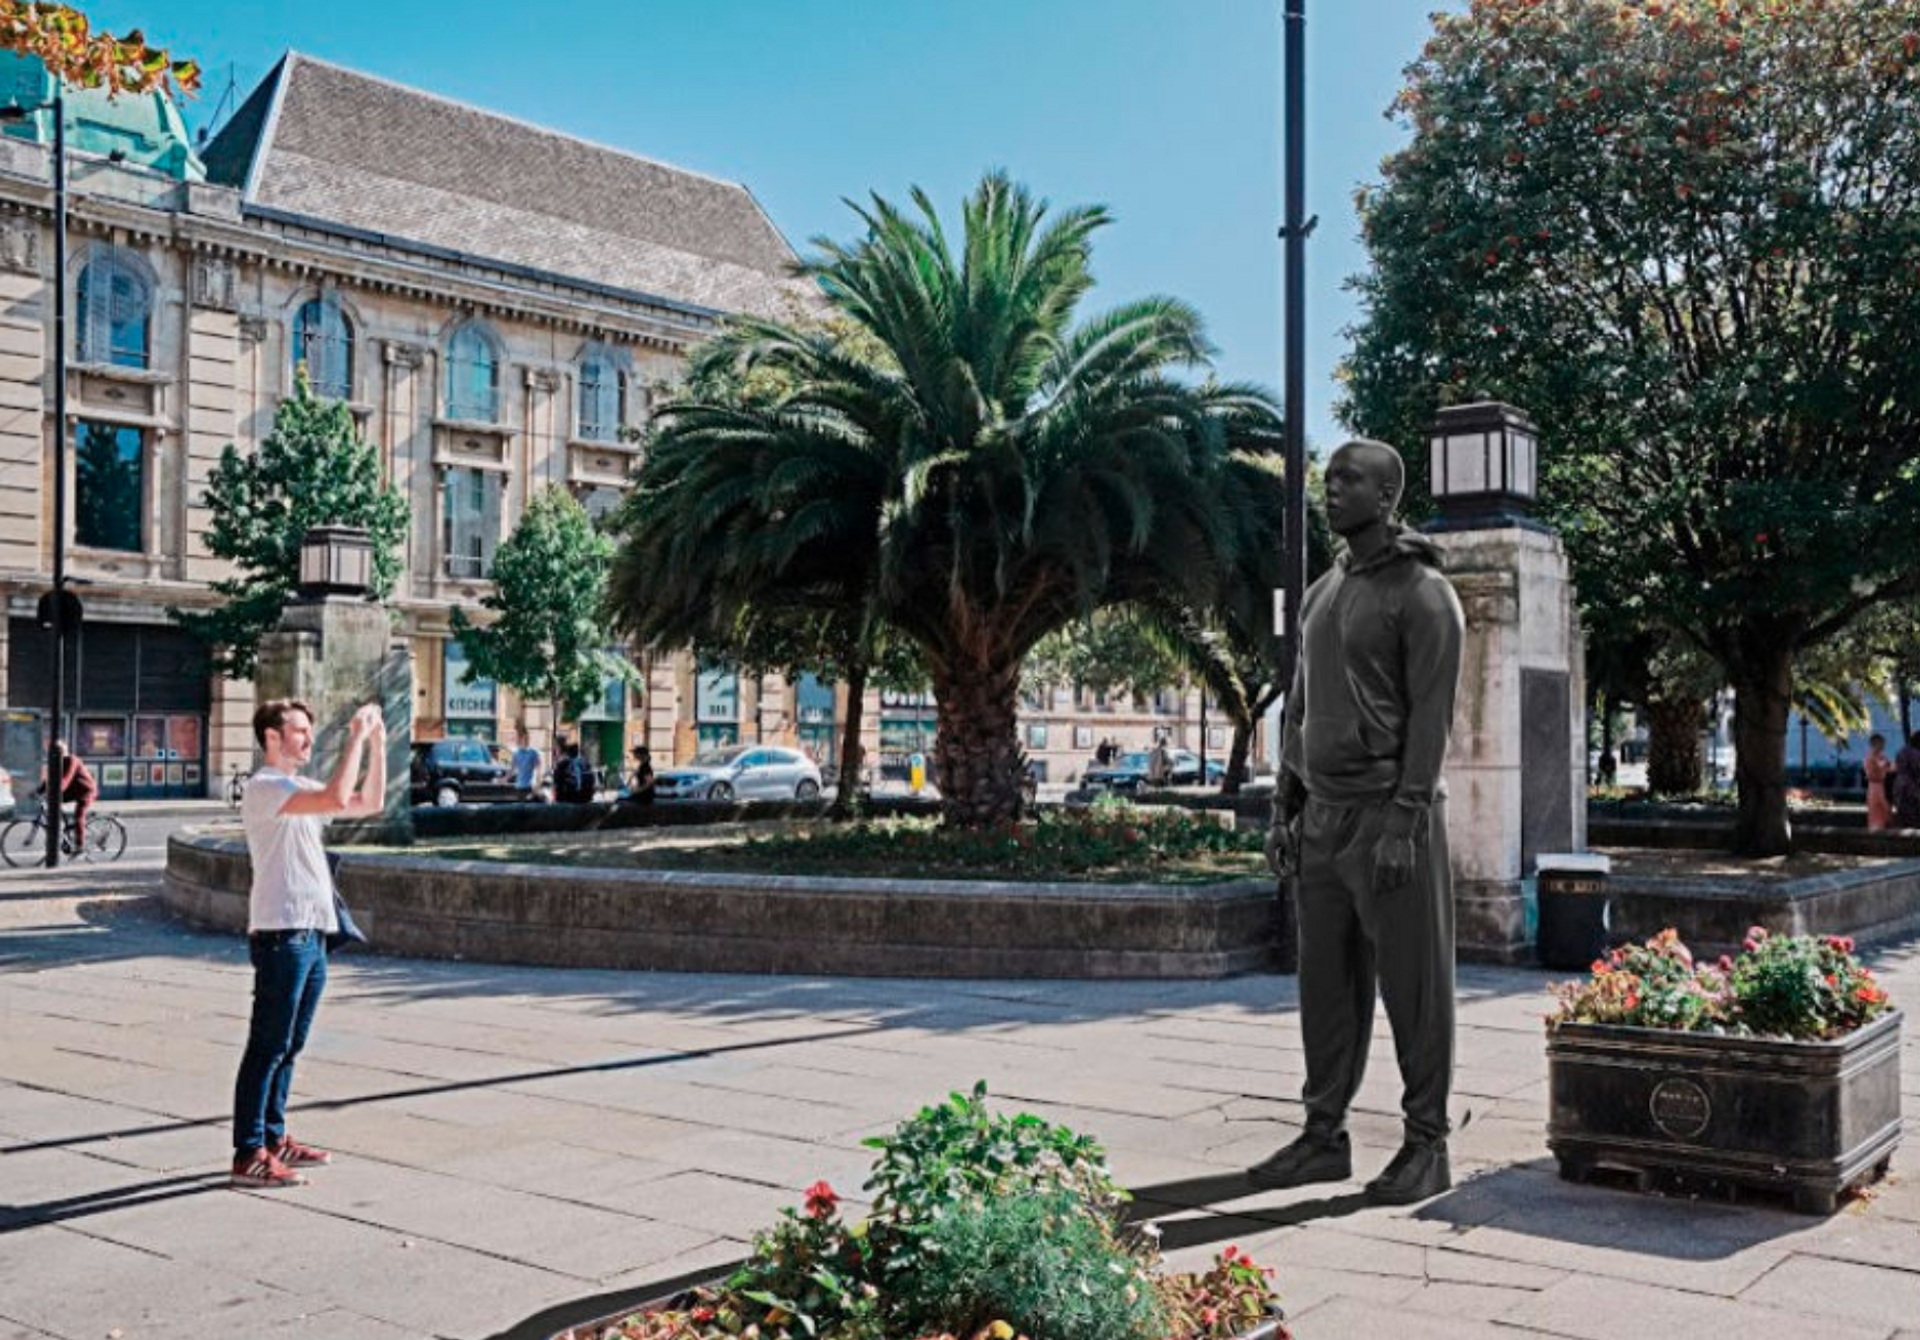 One of the proposed sculptures, by the artist Thomas J Price, which depicts a person connected to the Windrush generation Courtesy of the artist and Hackney Council